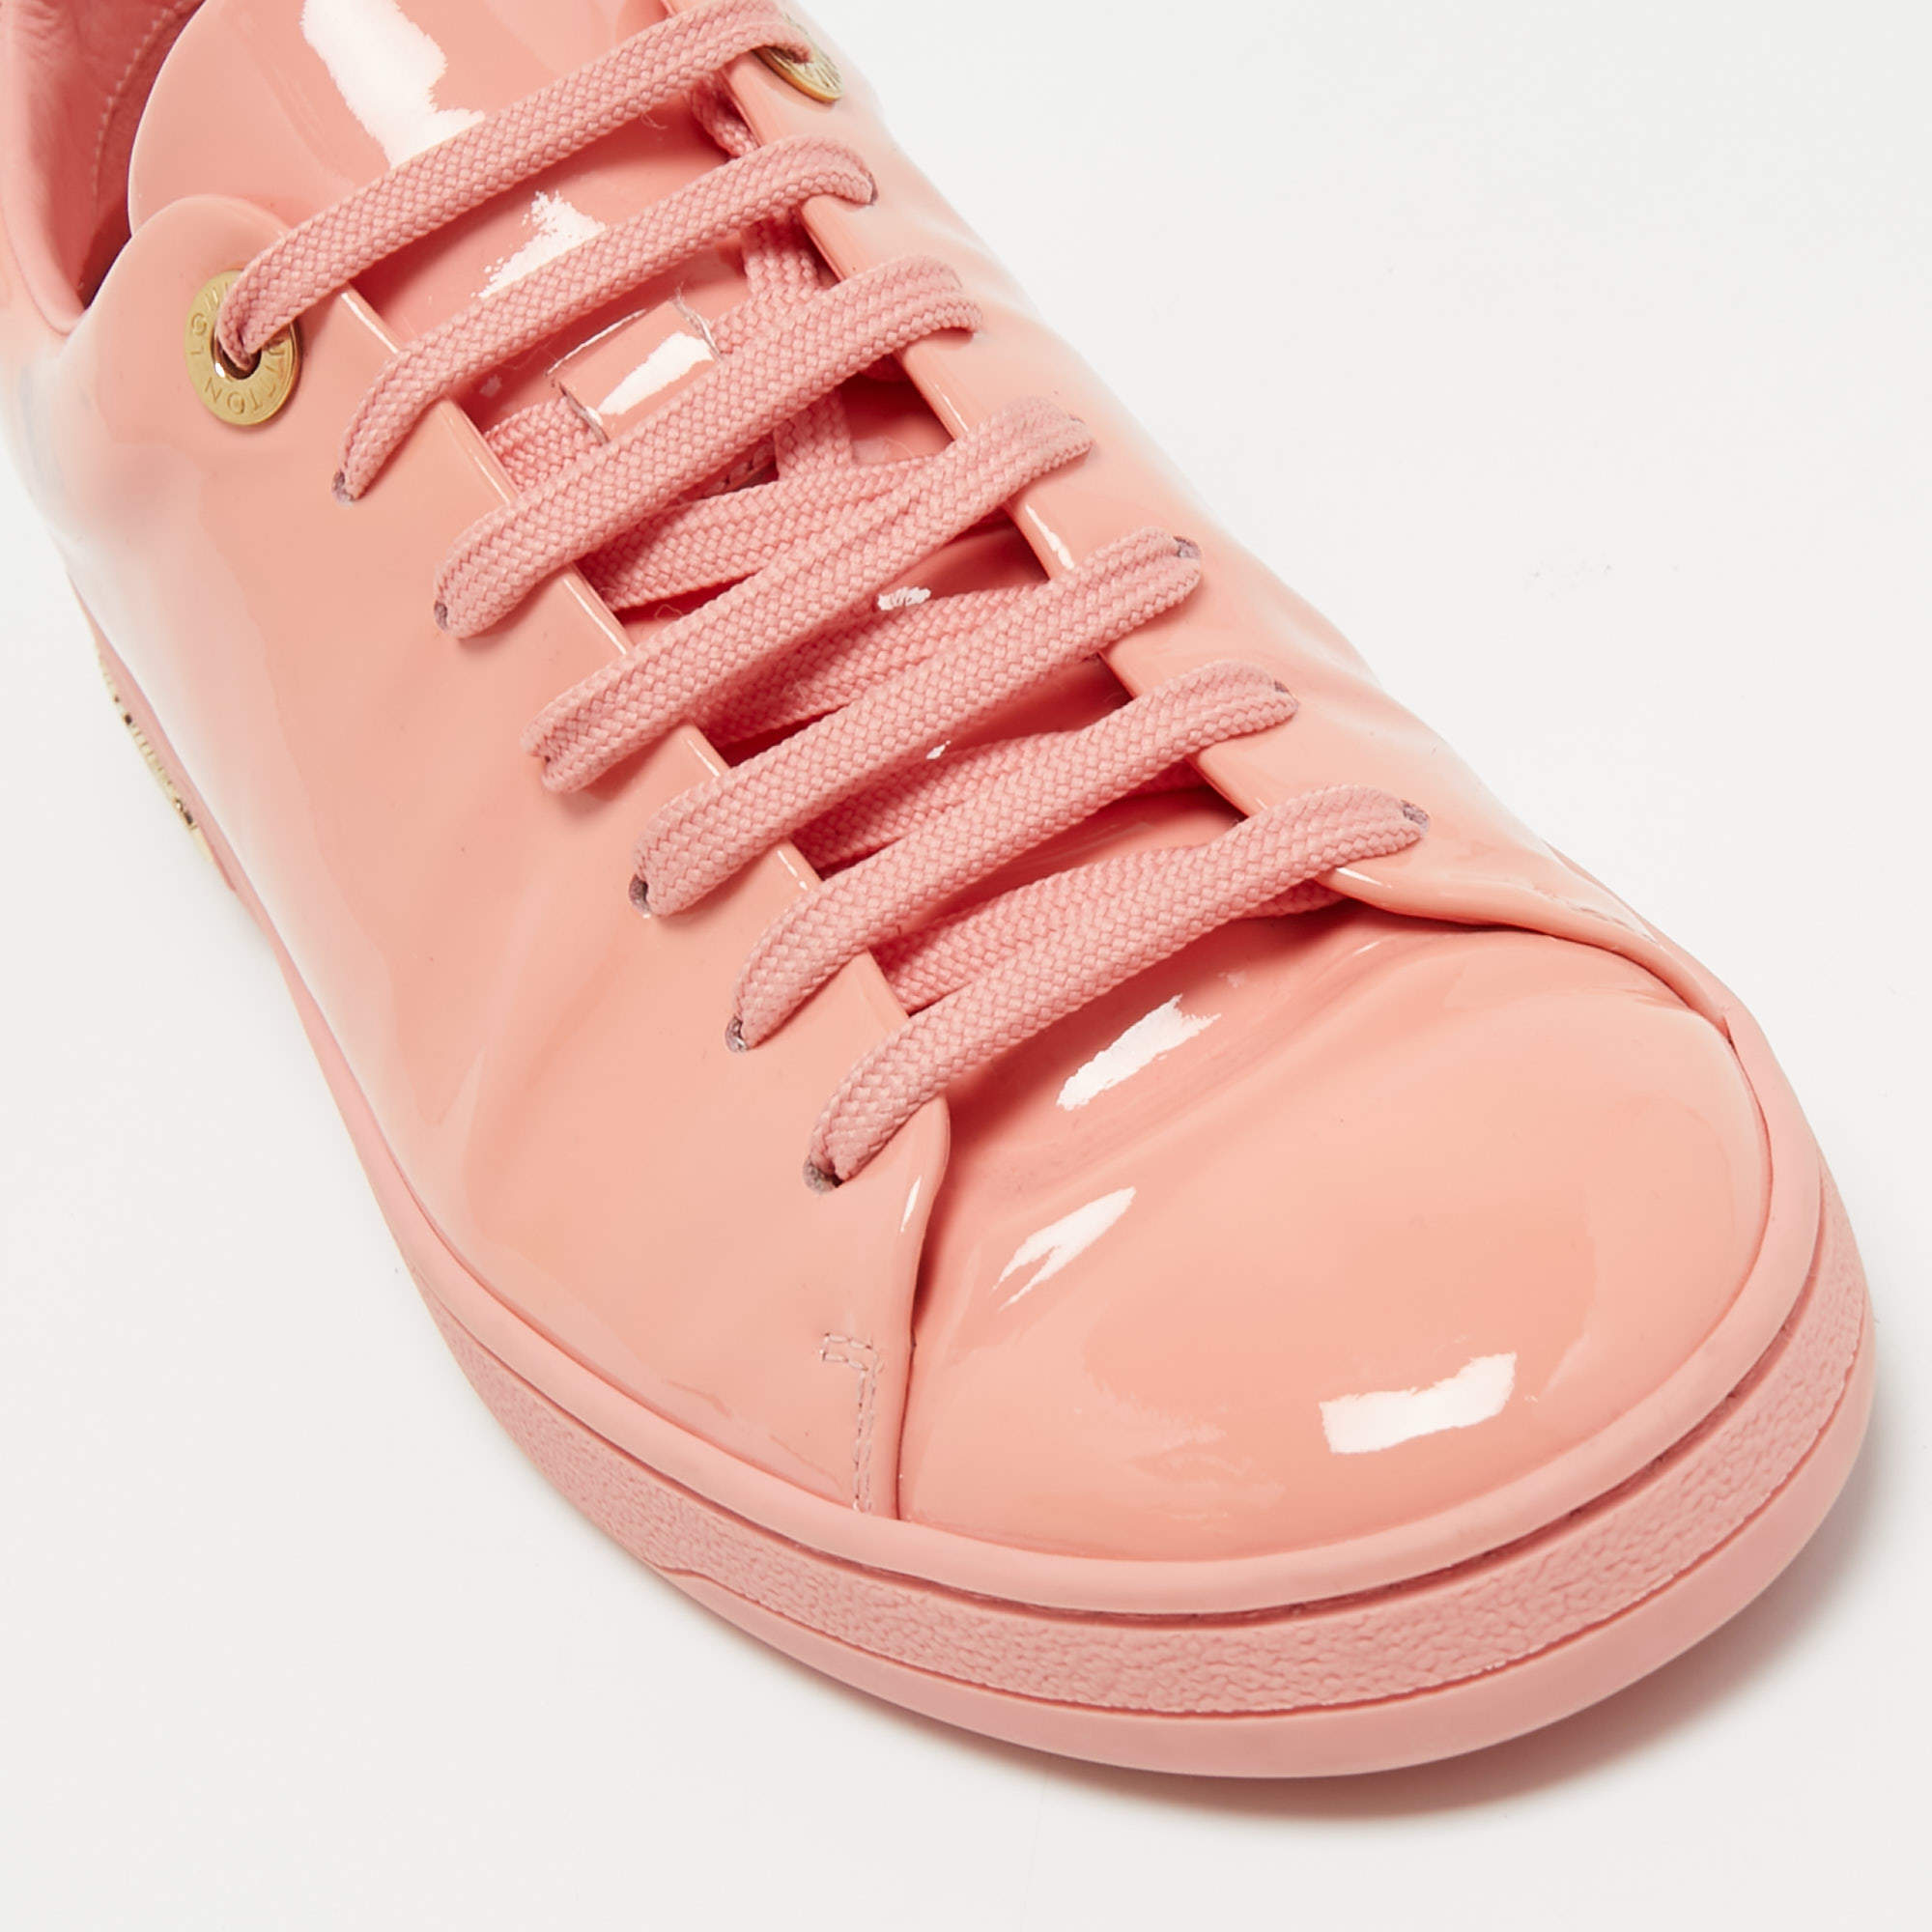 Louis Vuitton Neon Pink Frontrow Sneakers 35 – The Closet